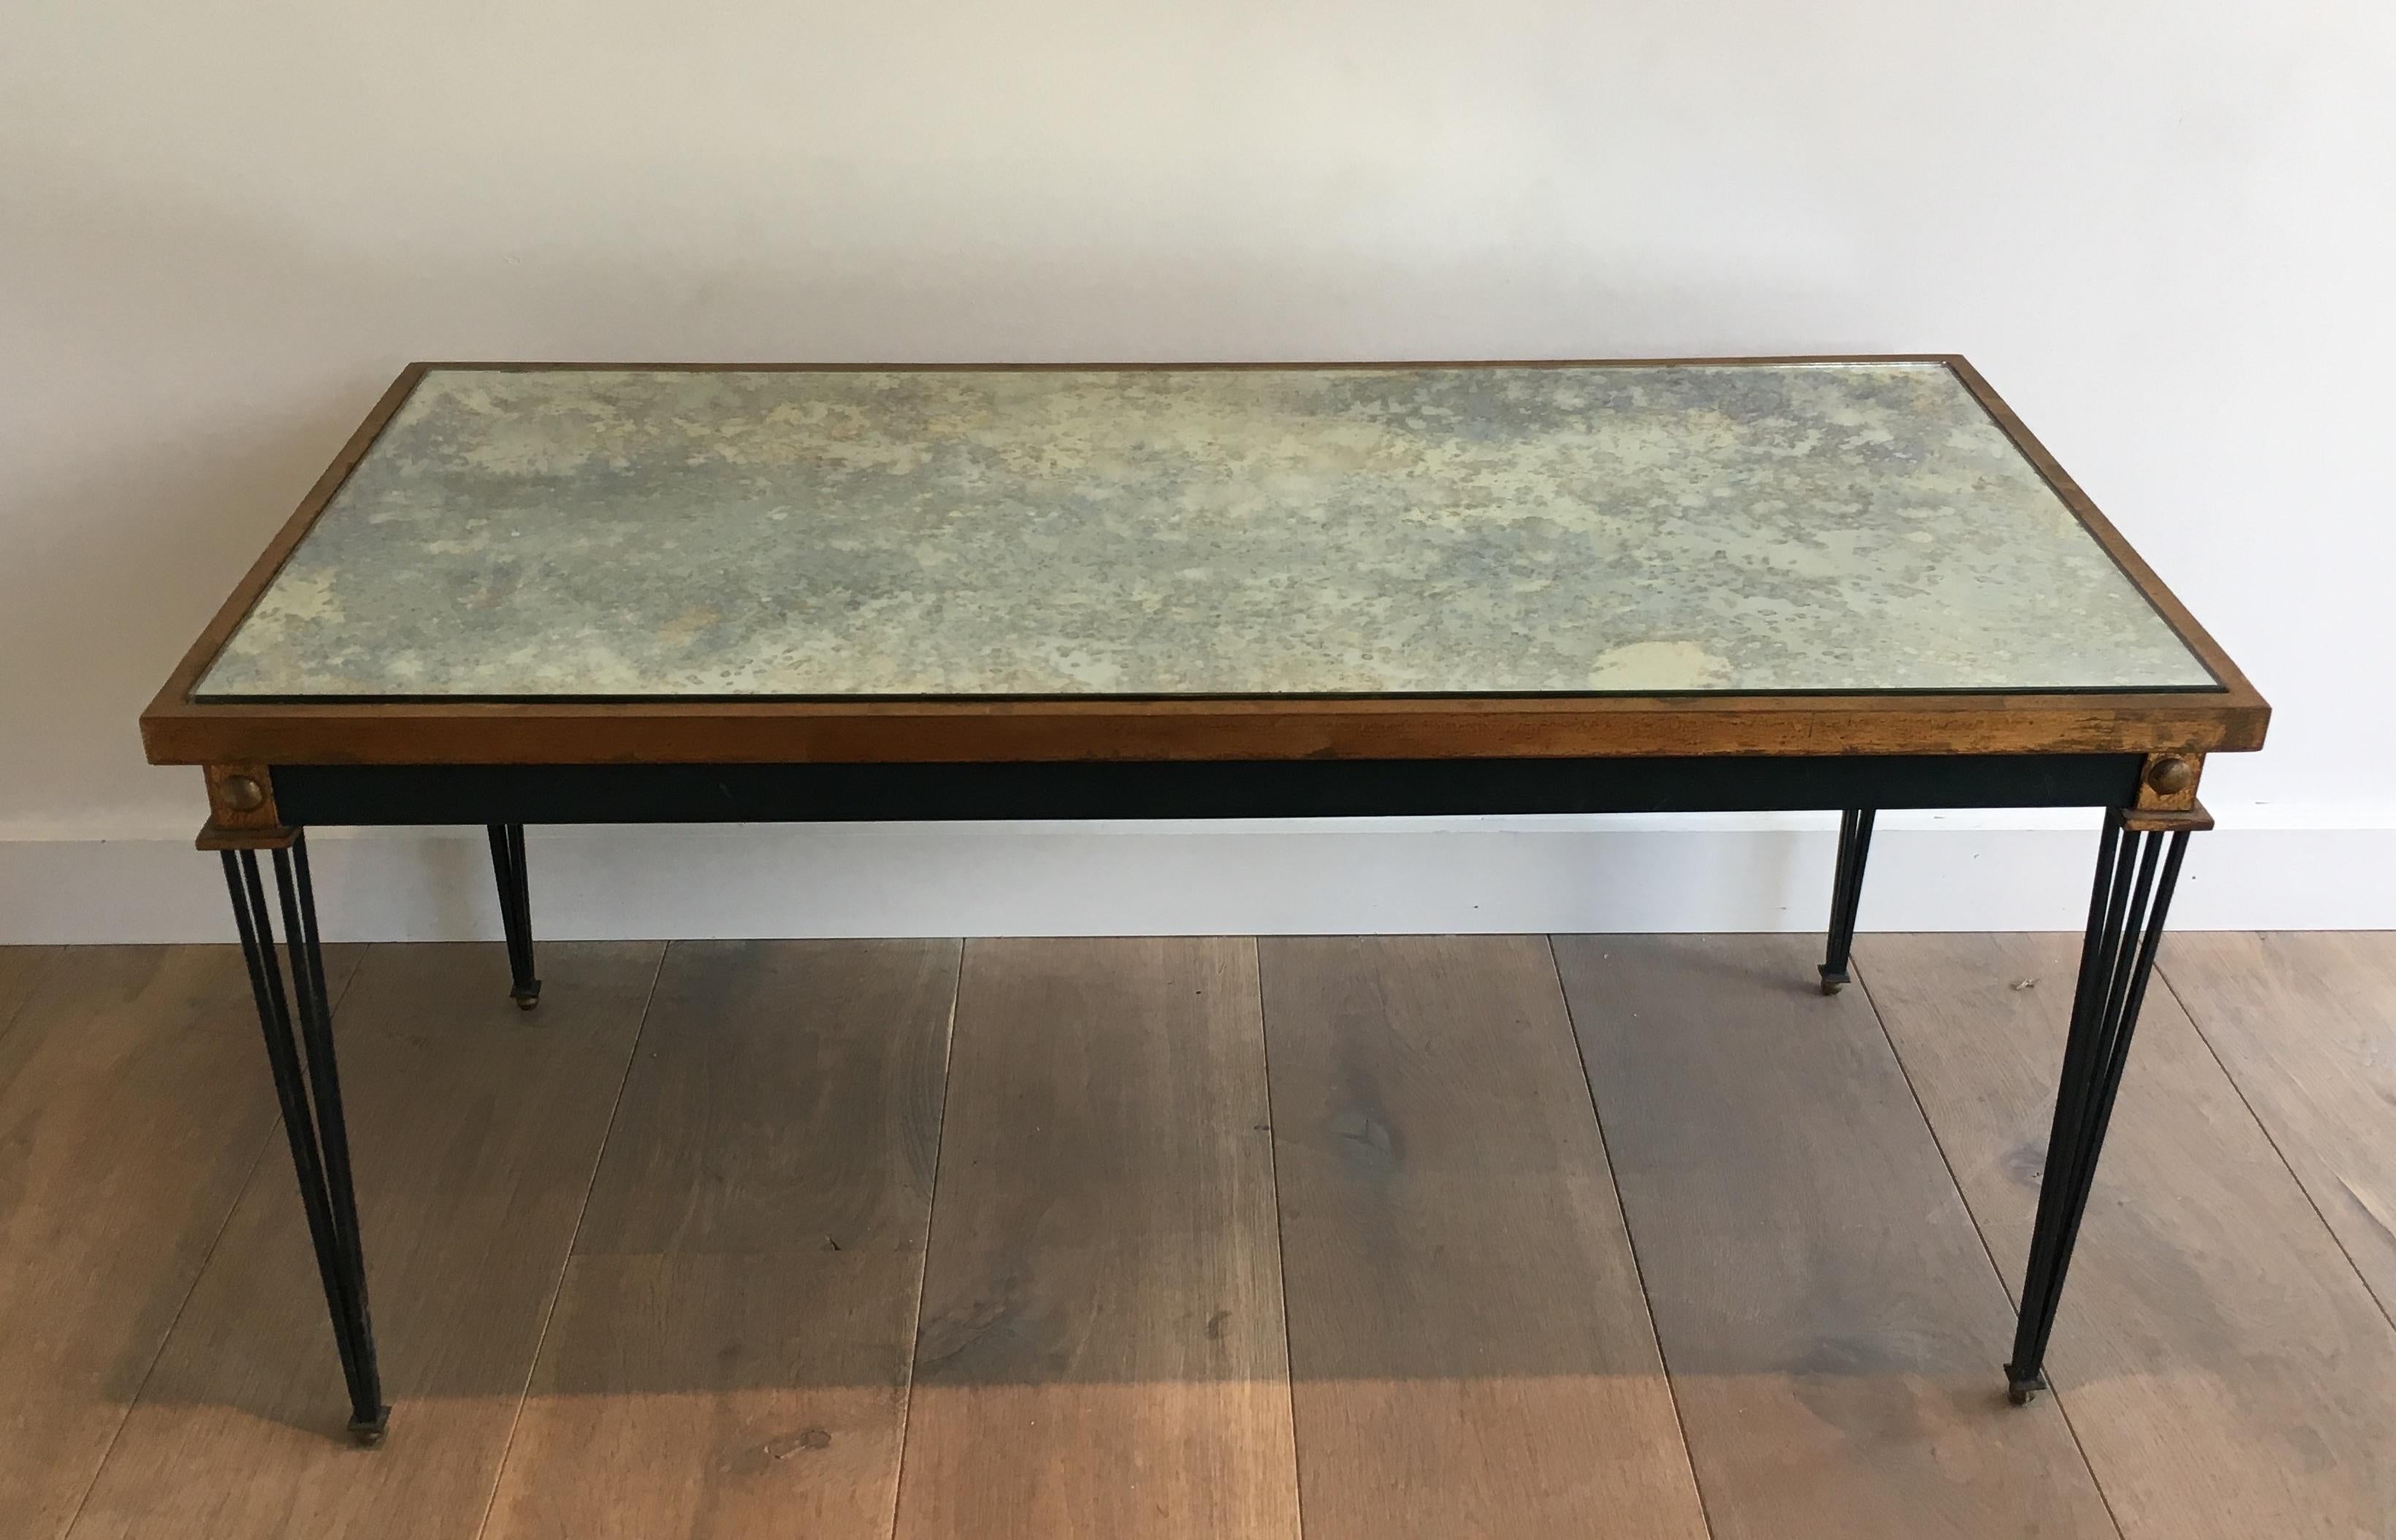 This coffee table is made of painted and gilt steel with a faux-antiques mirror (a little bit damaged on a corner). This is a work in the style of famous French designer Jacques Quinet, circa 1940.